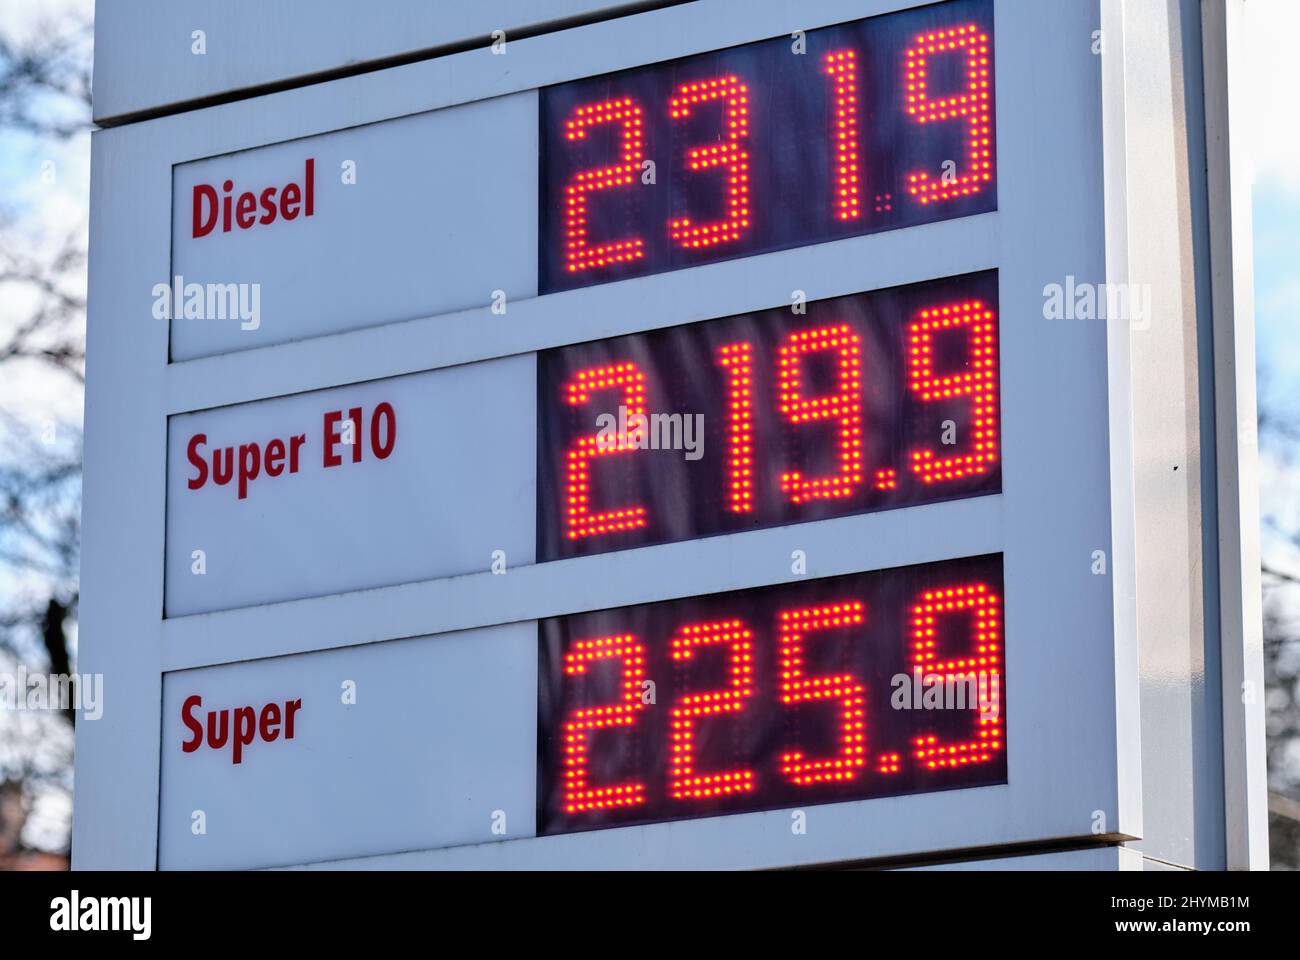 Close-up of a sign at a gas station showing extremely high gasoline prices due to the war in Ukraine. Seen in Germany on March 14, 2022 Stock Photo